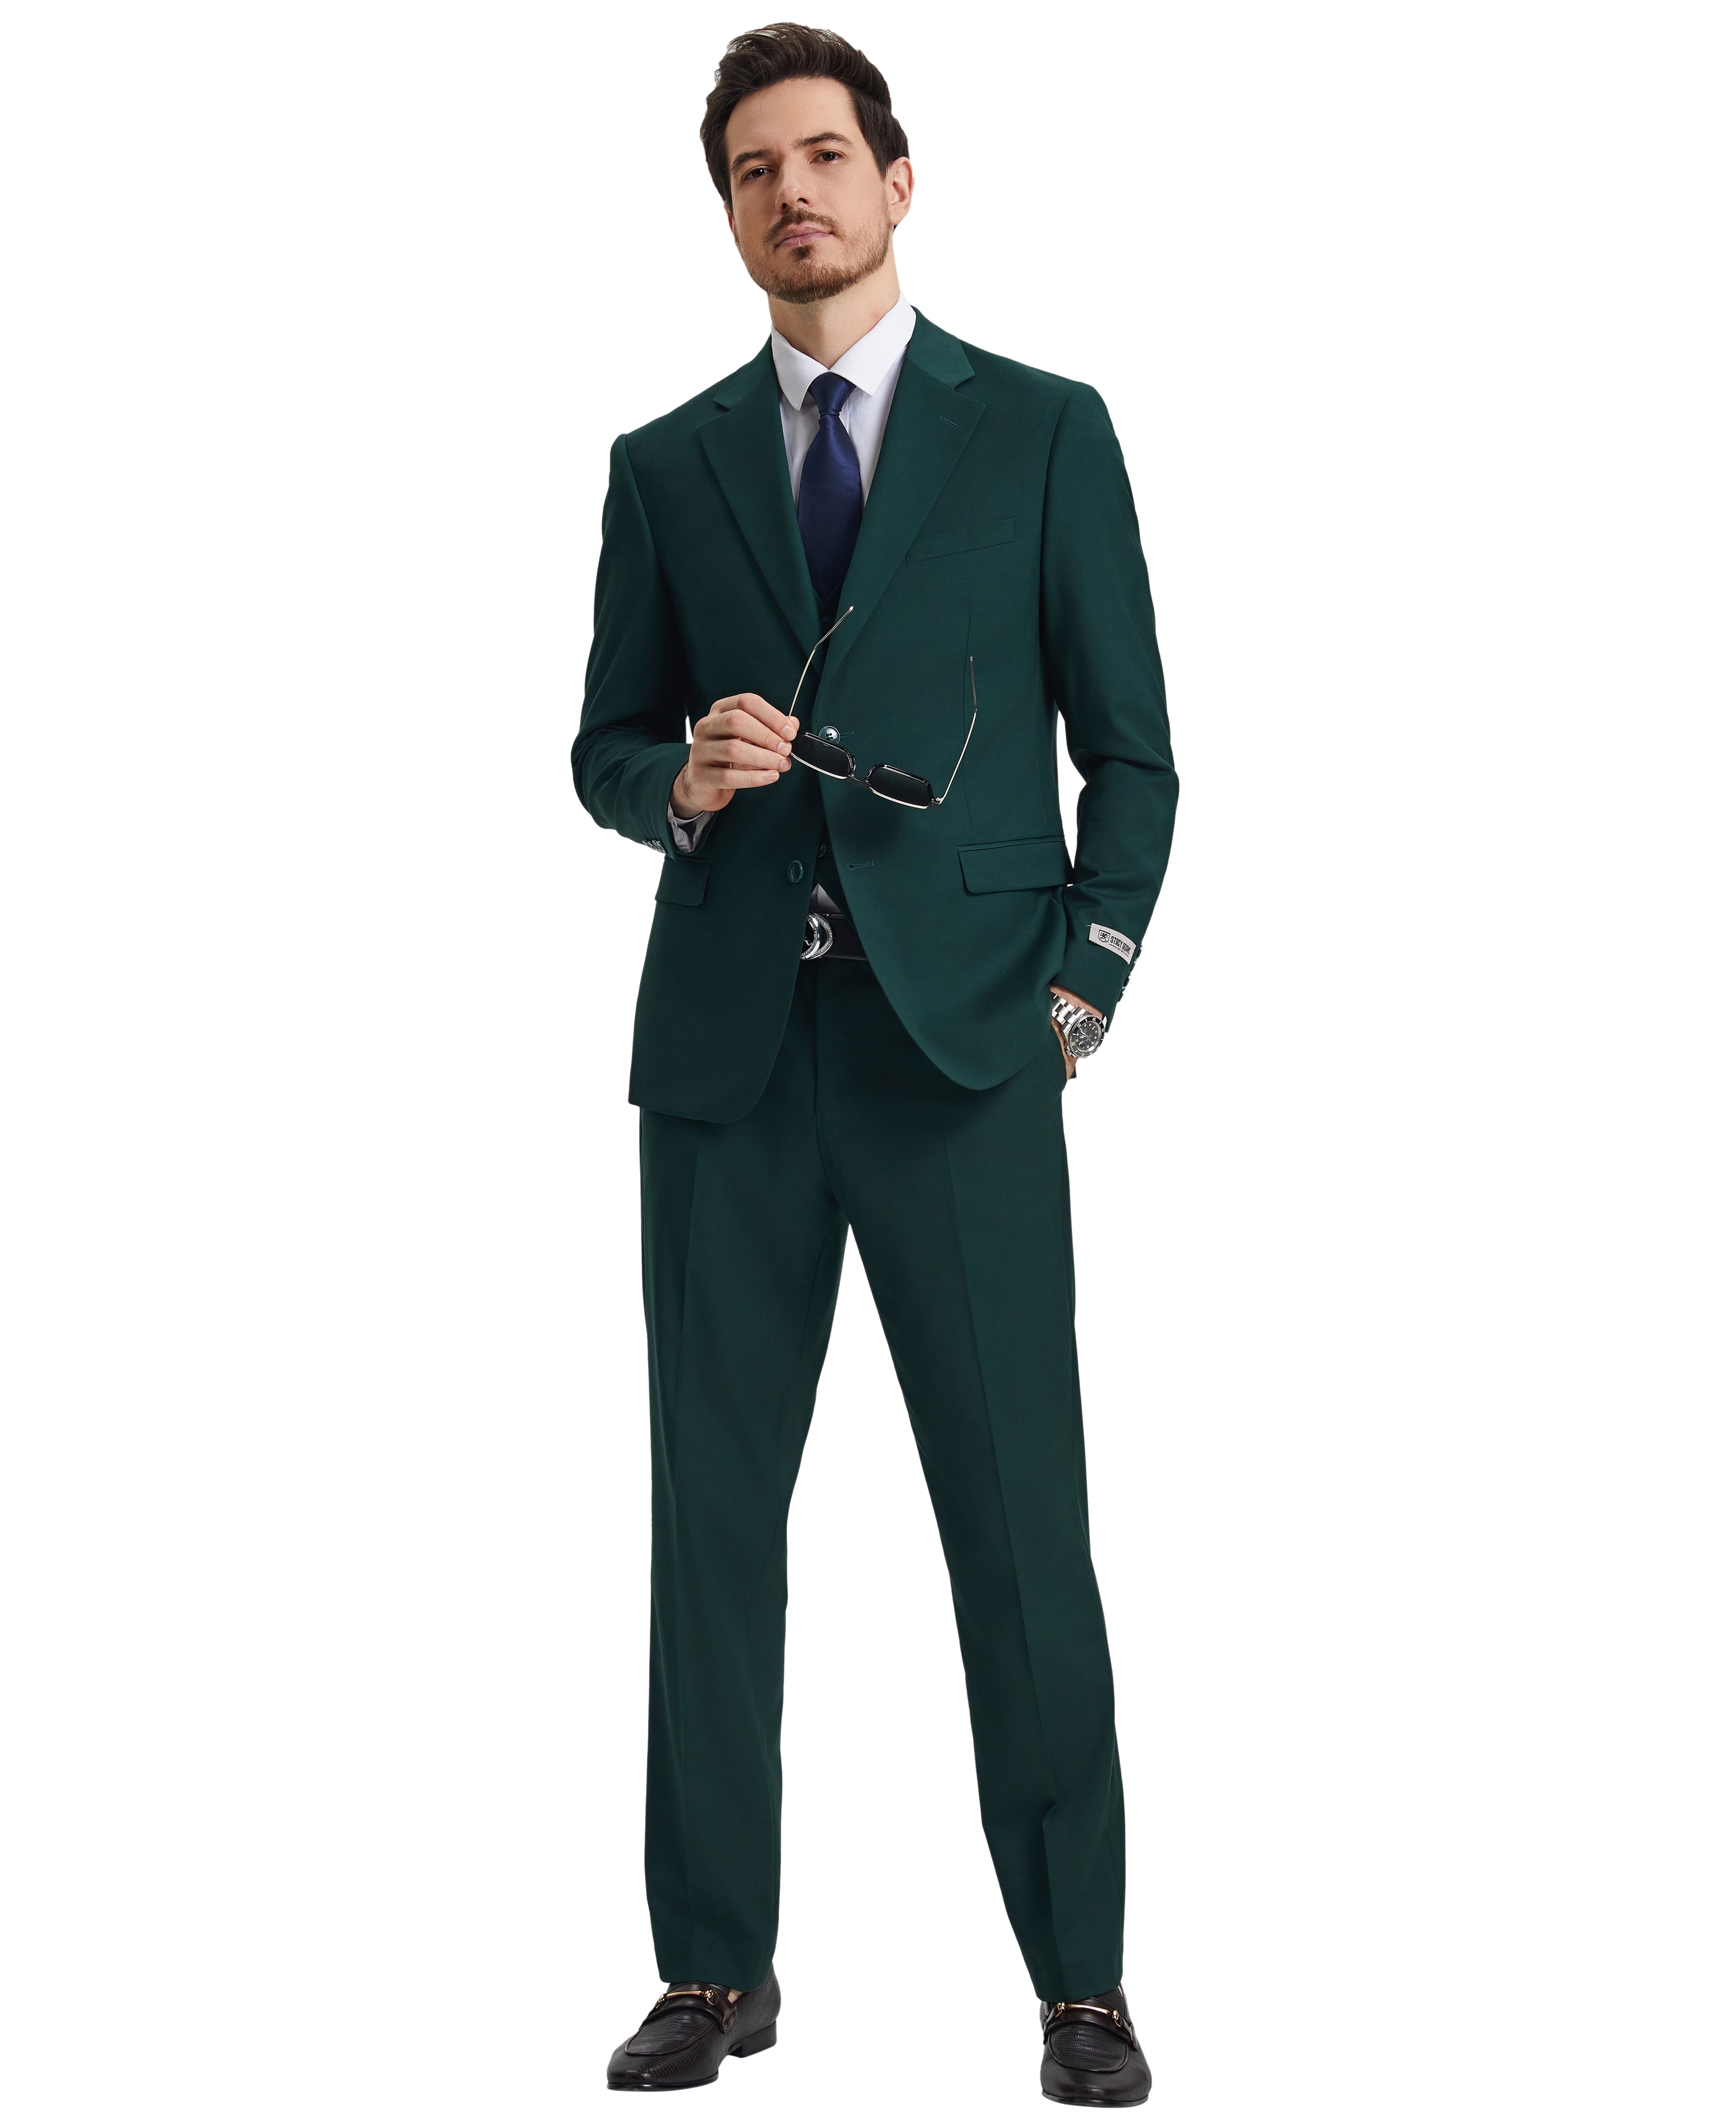 Stacy Adams 3 PC Green Solid Mens Suit